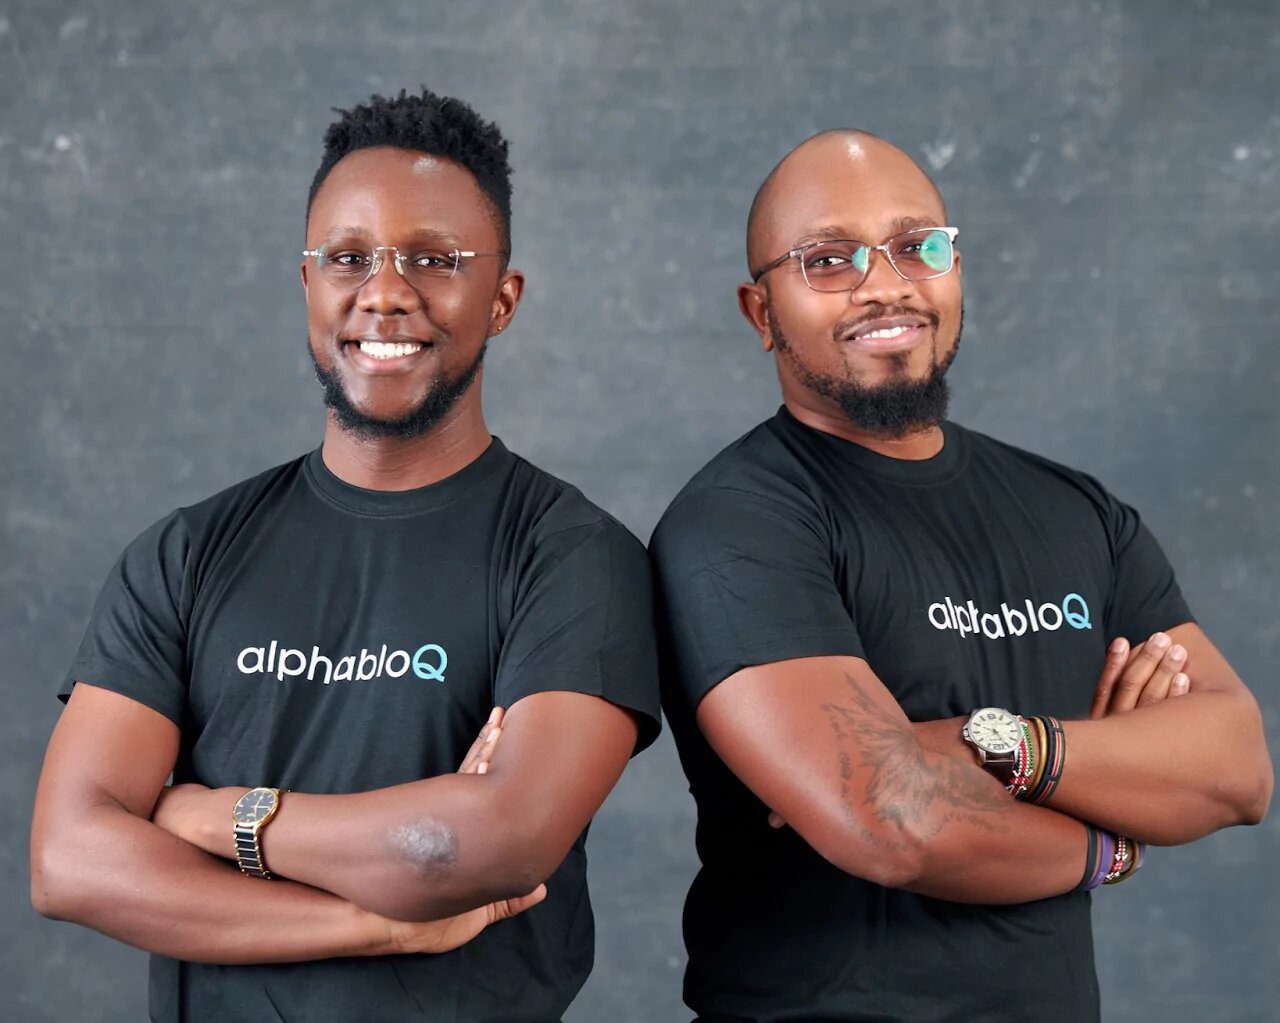 Techstars-backed alphabloQ wants your next investment to be in real estate